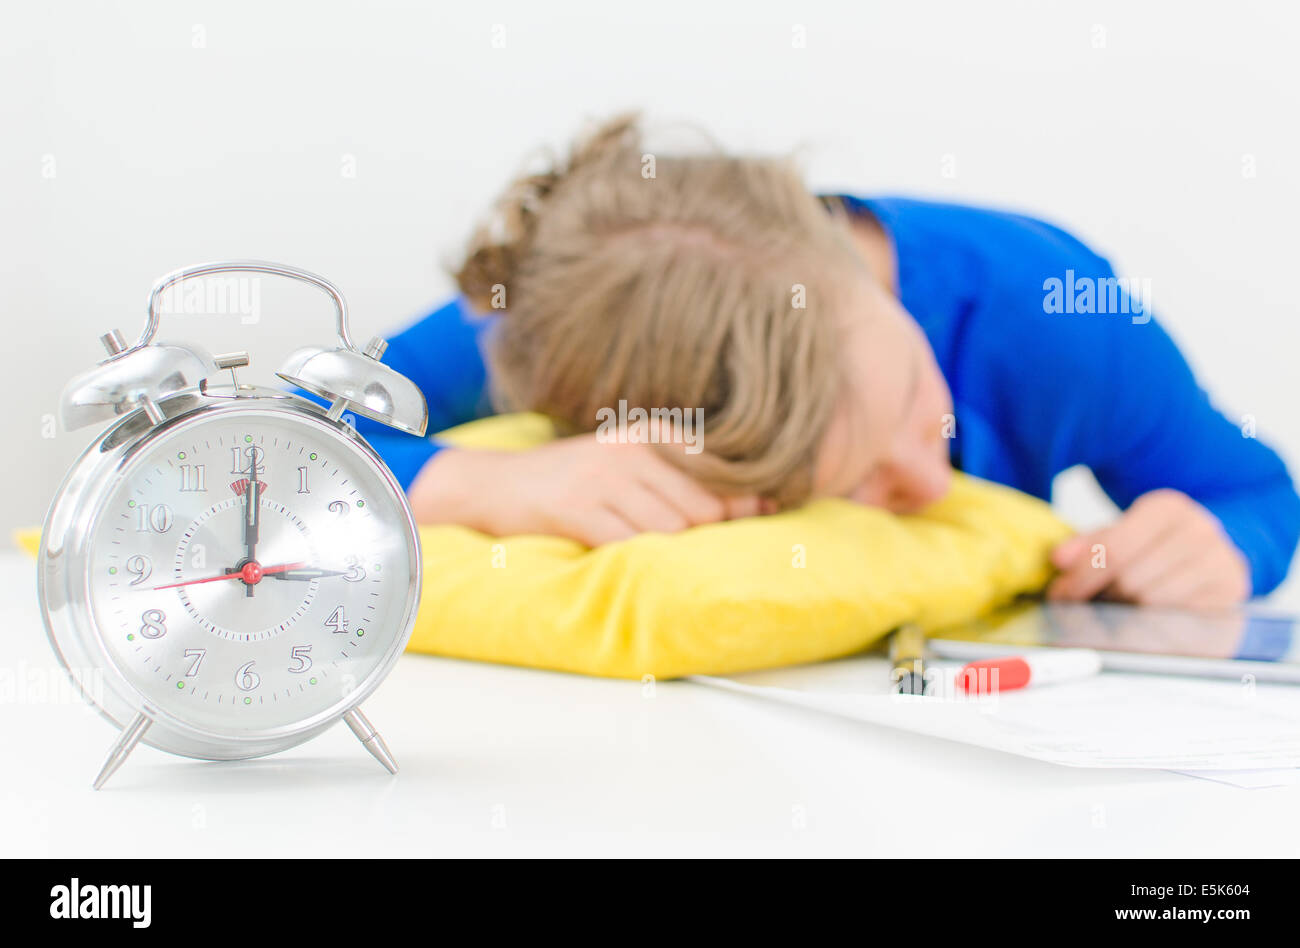 Schedule of the day. Workday. Woman fell asleep on the table. Stock Photo